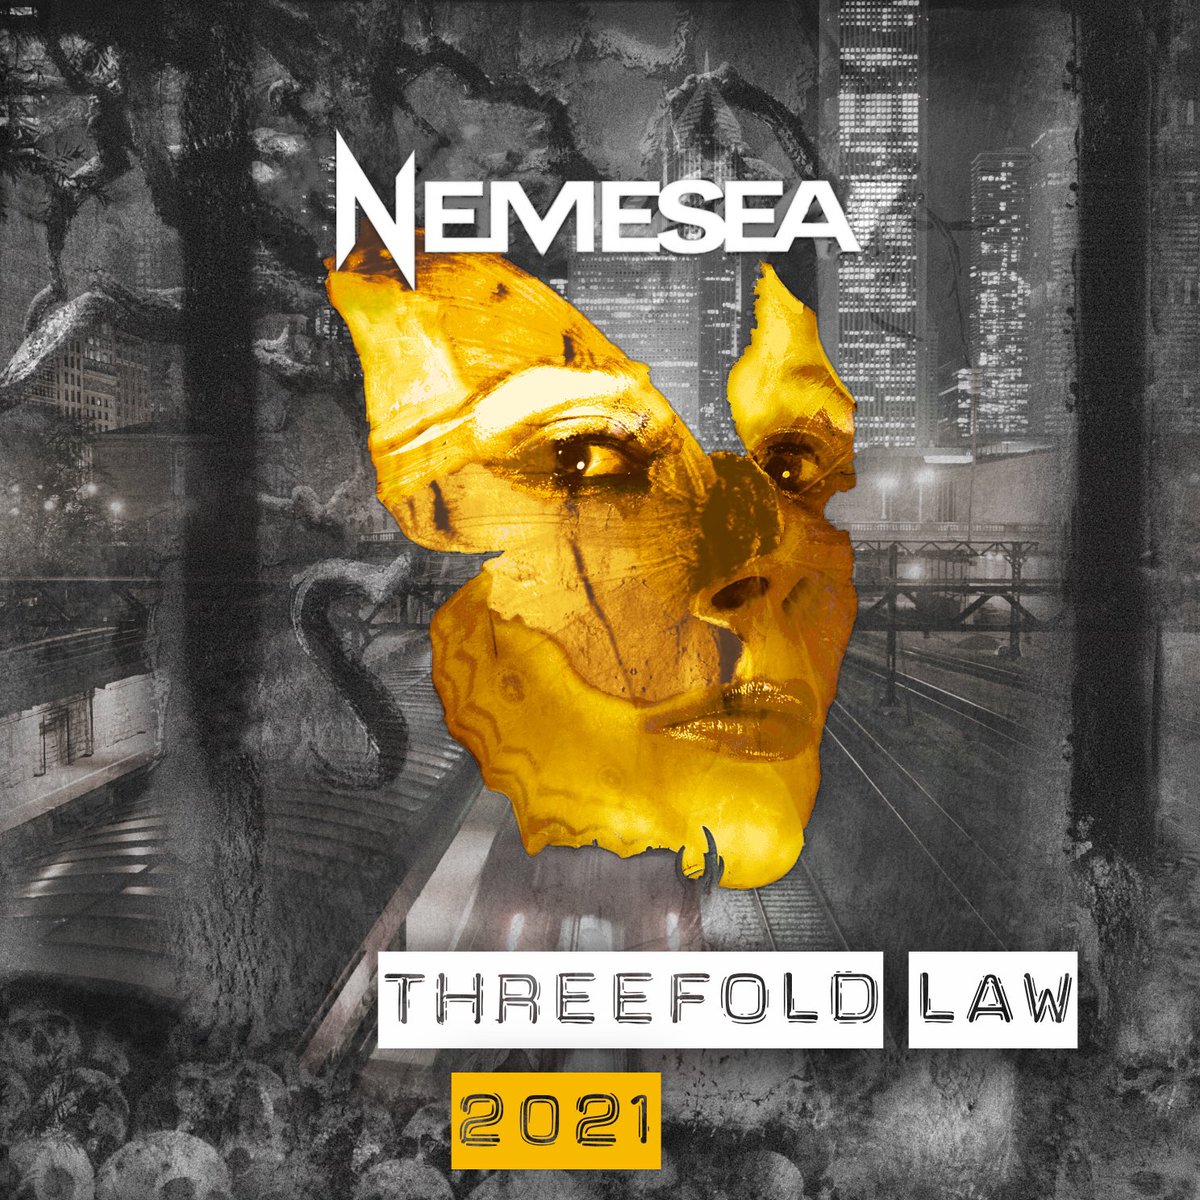 The new cover for our 2021 version of Threefold Law! 🔥🤟🏼🙌🏼 Coming this monday!
.
.
.
.
.
.
.
#2021music #newmusic #threefoldlaw #cover #freshfresh #newnewnew #spotifyplaylist #spotifyartist #spotifymetal #groningen #groningencity